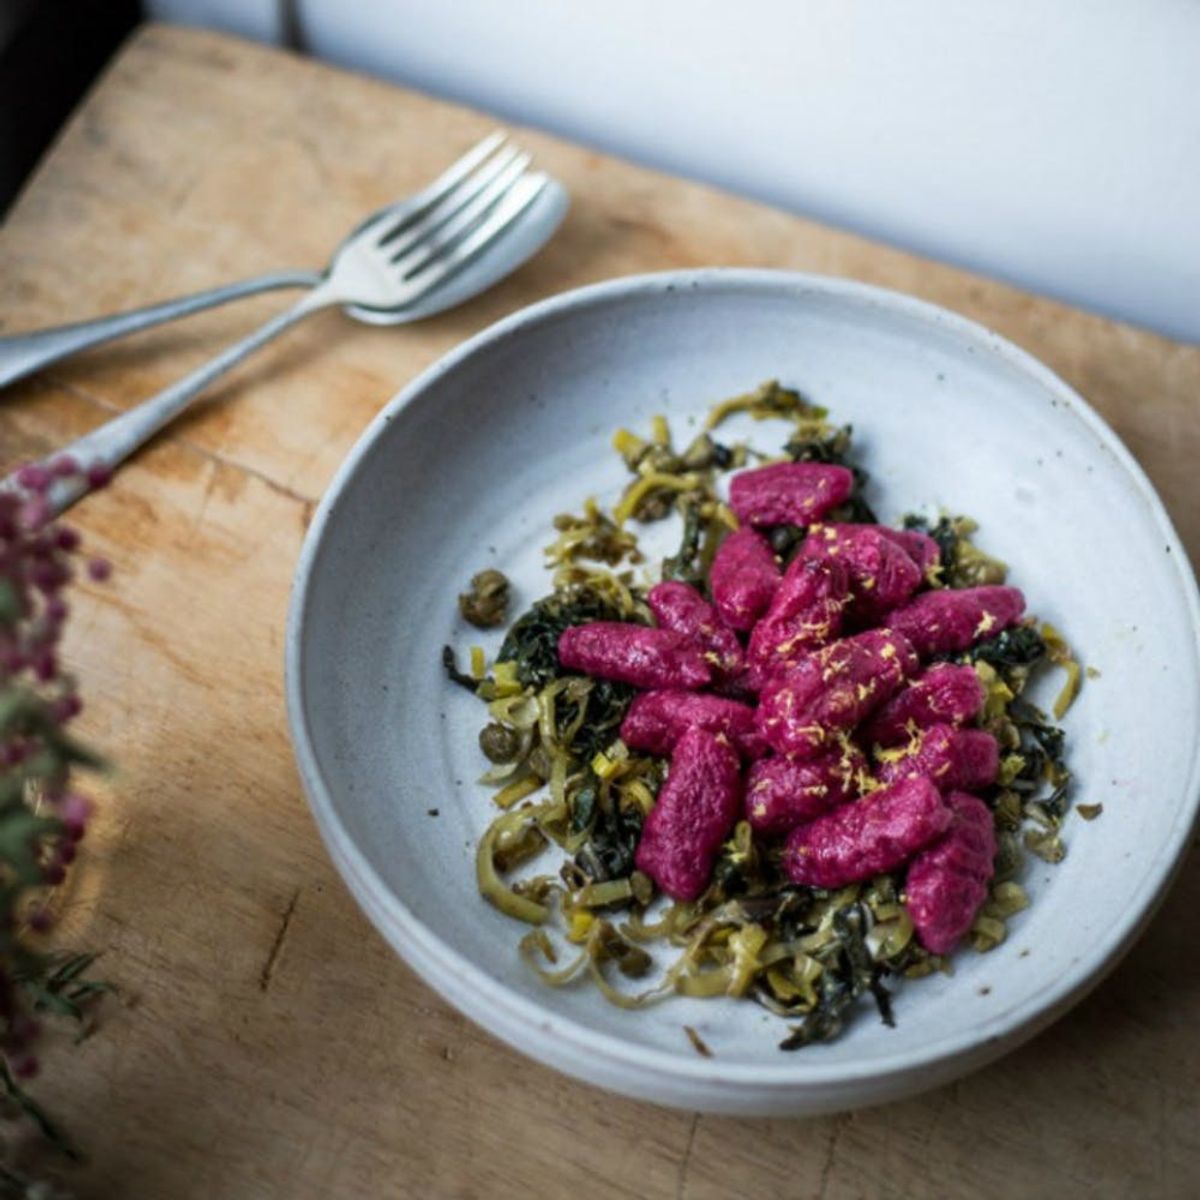 14 Savory Beetroot Dinner Recipes That Are So PRETTY on Your Plate